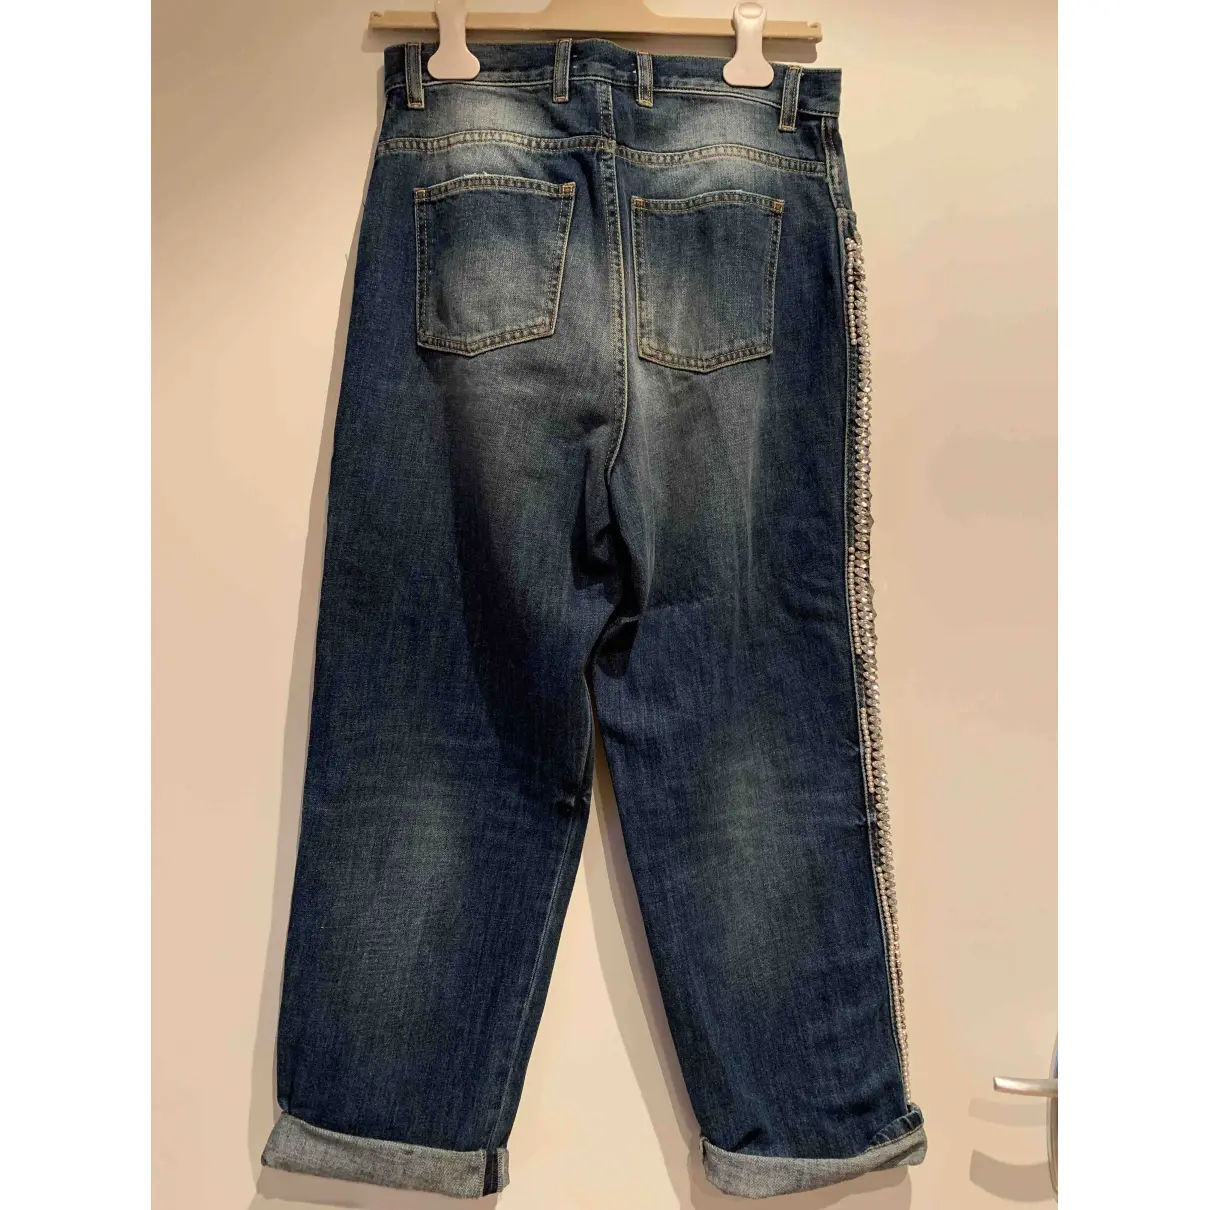 Buy Amen Italy Large jeans online